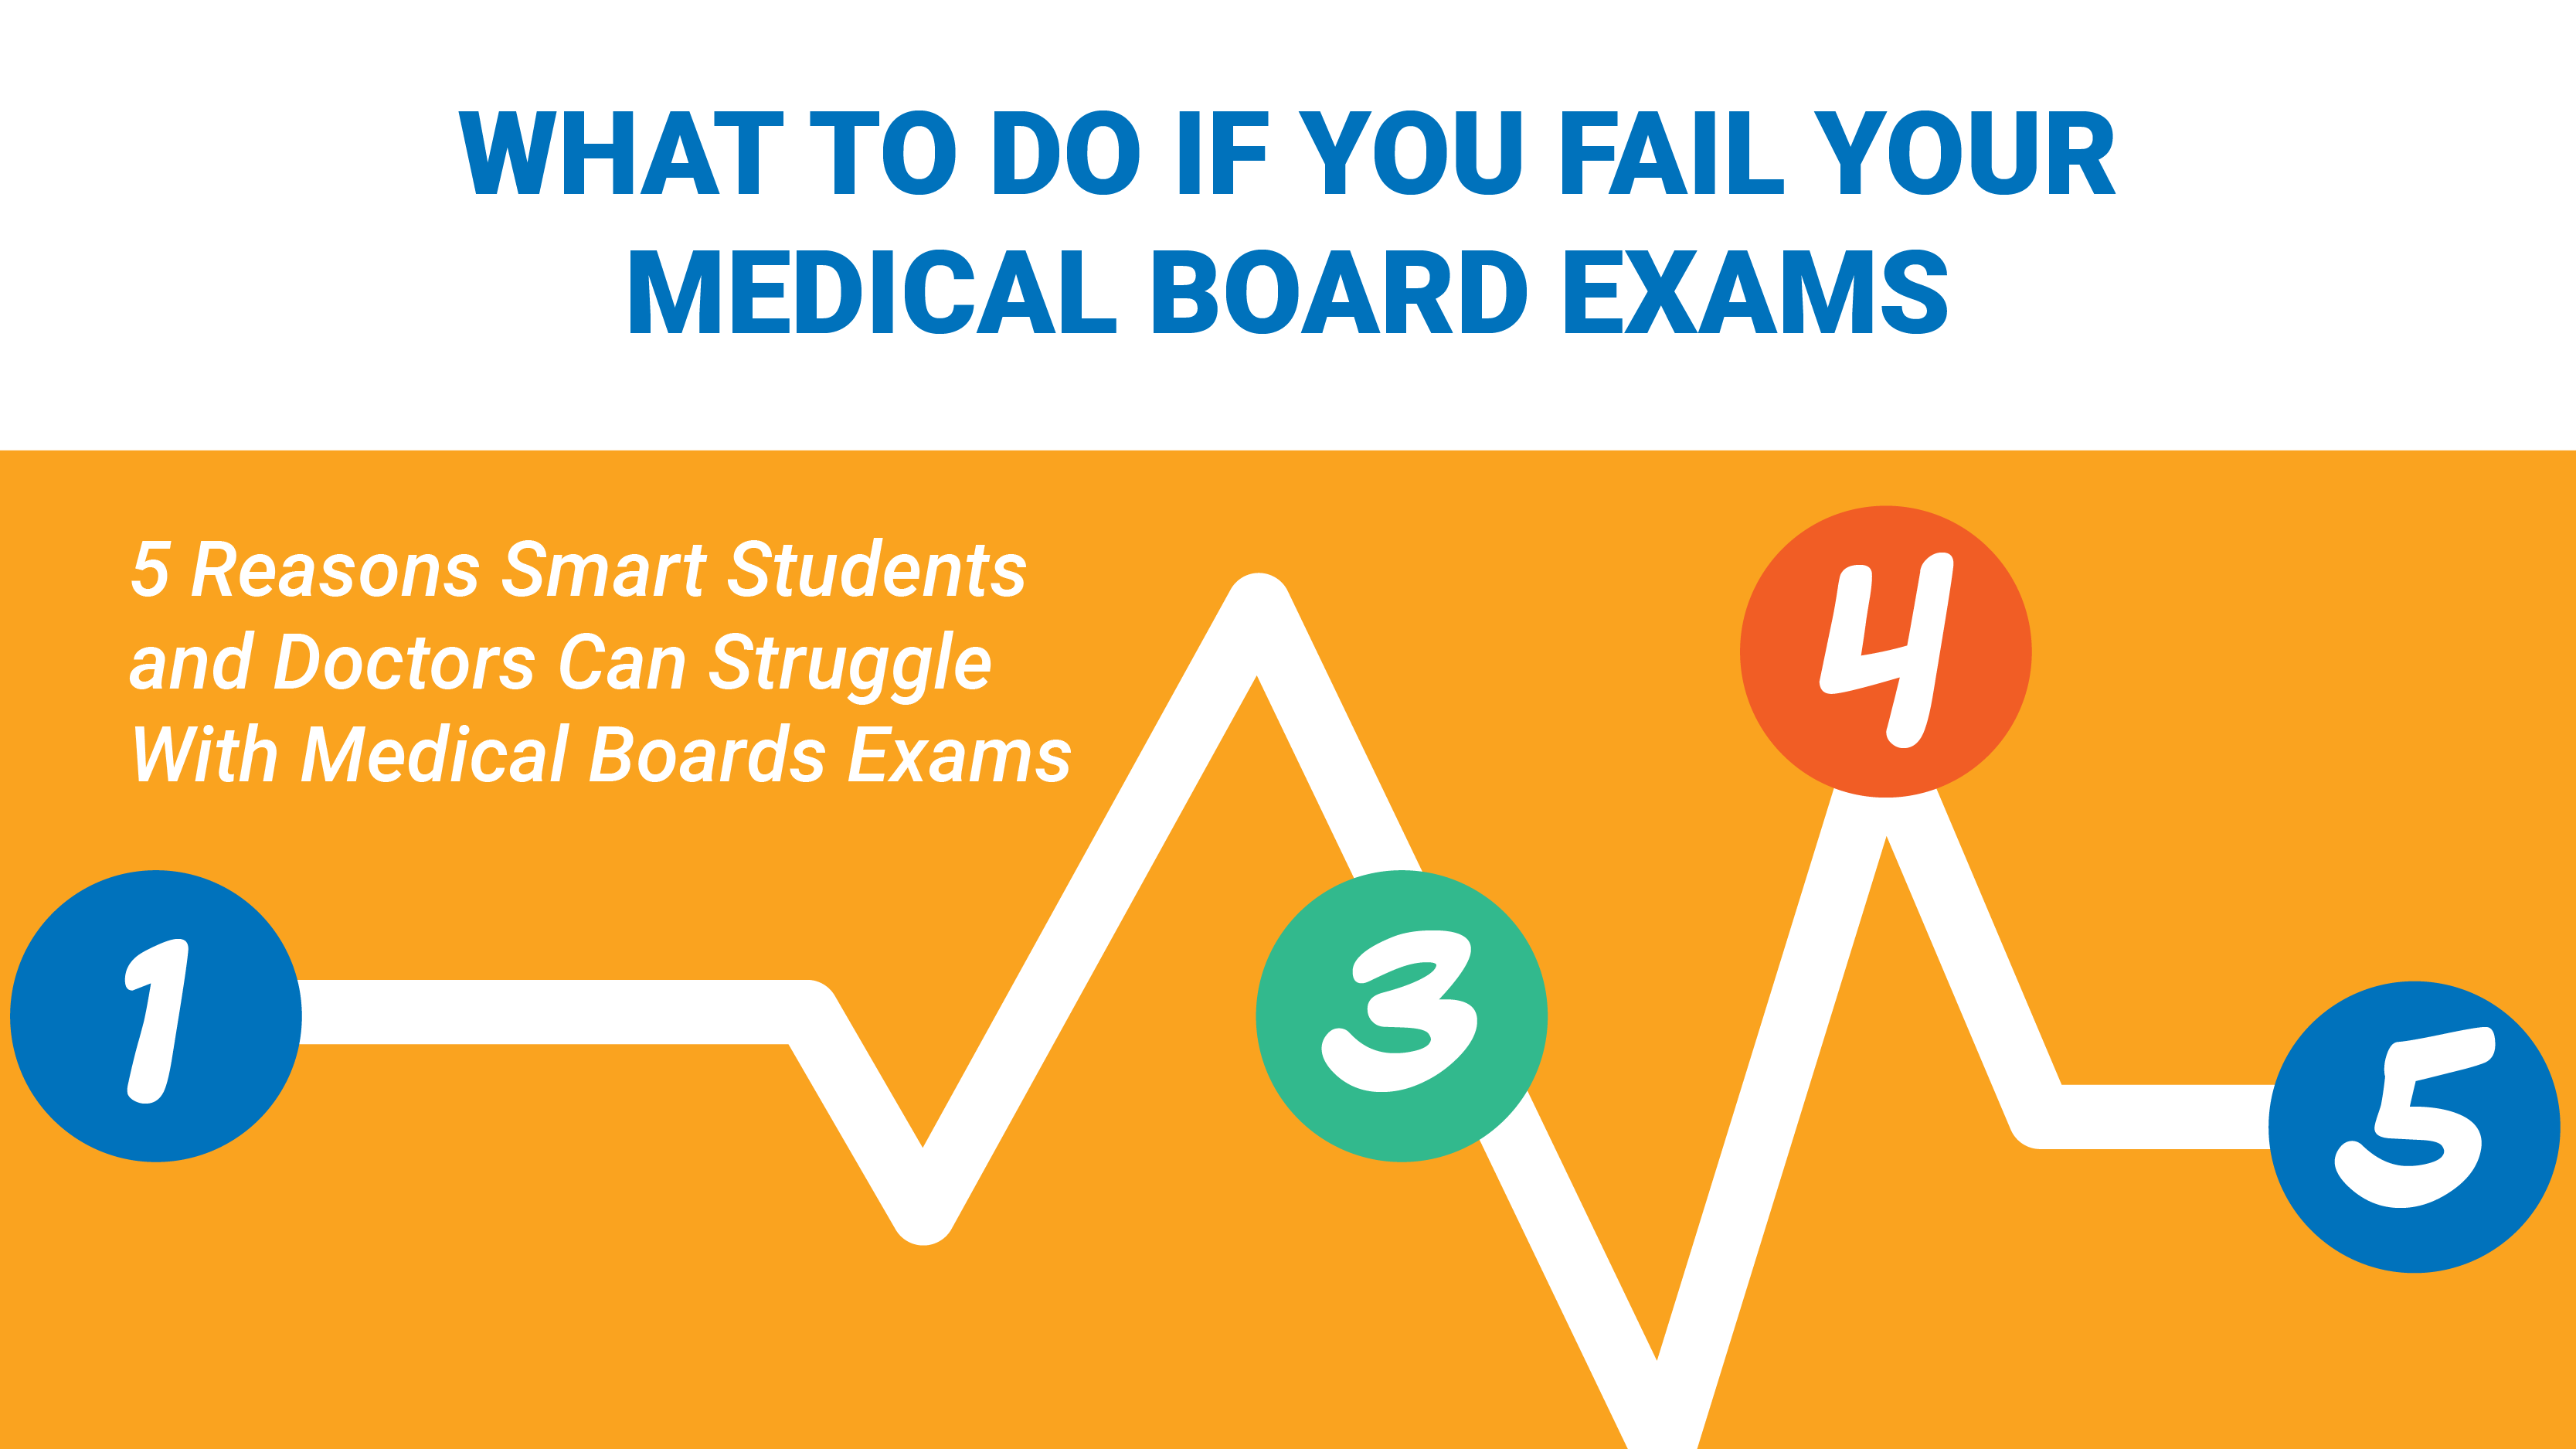 Featured image for “5 Reasons Smart Students and Doctors Fail Medical Boards Exams — and What To Do About It”